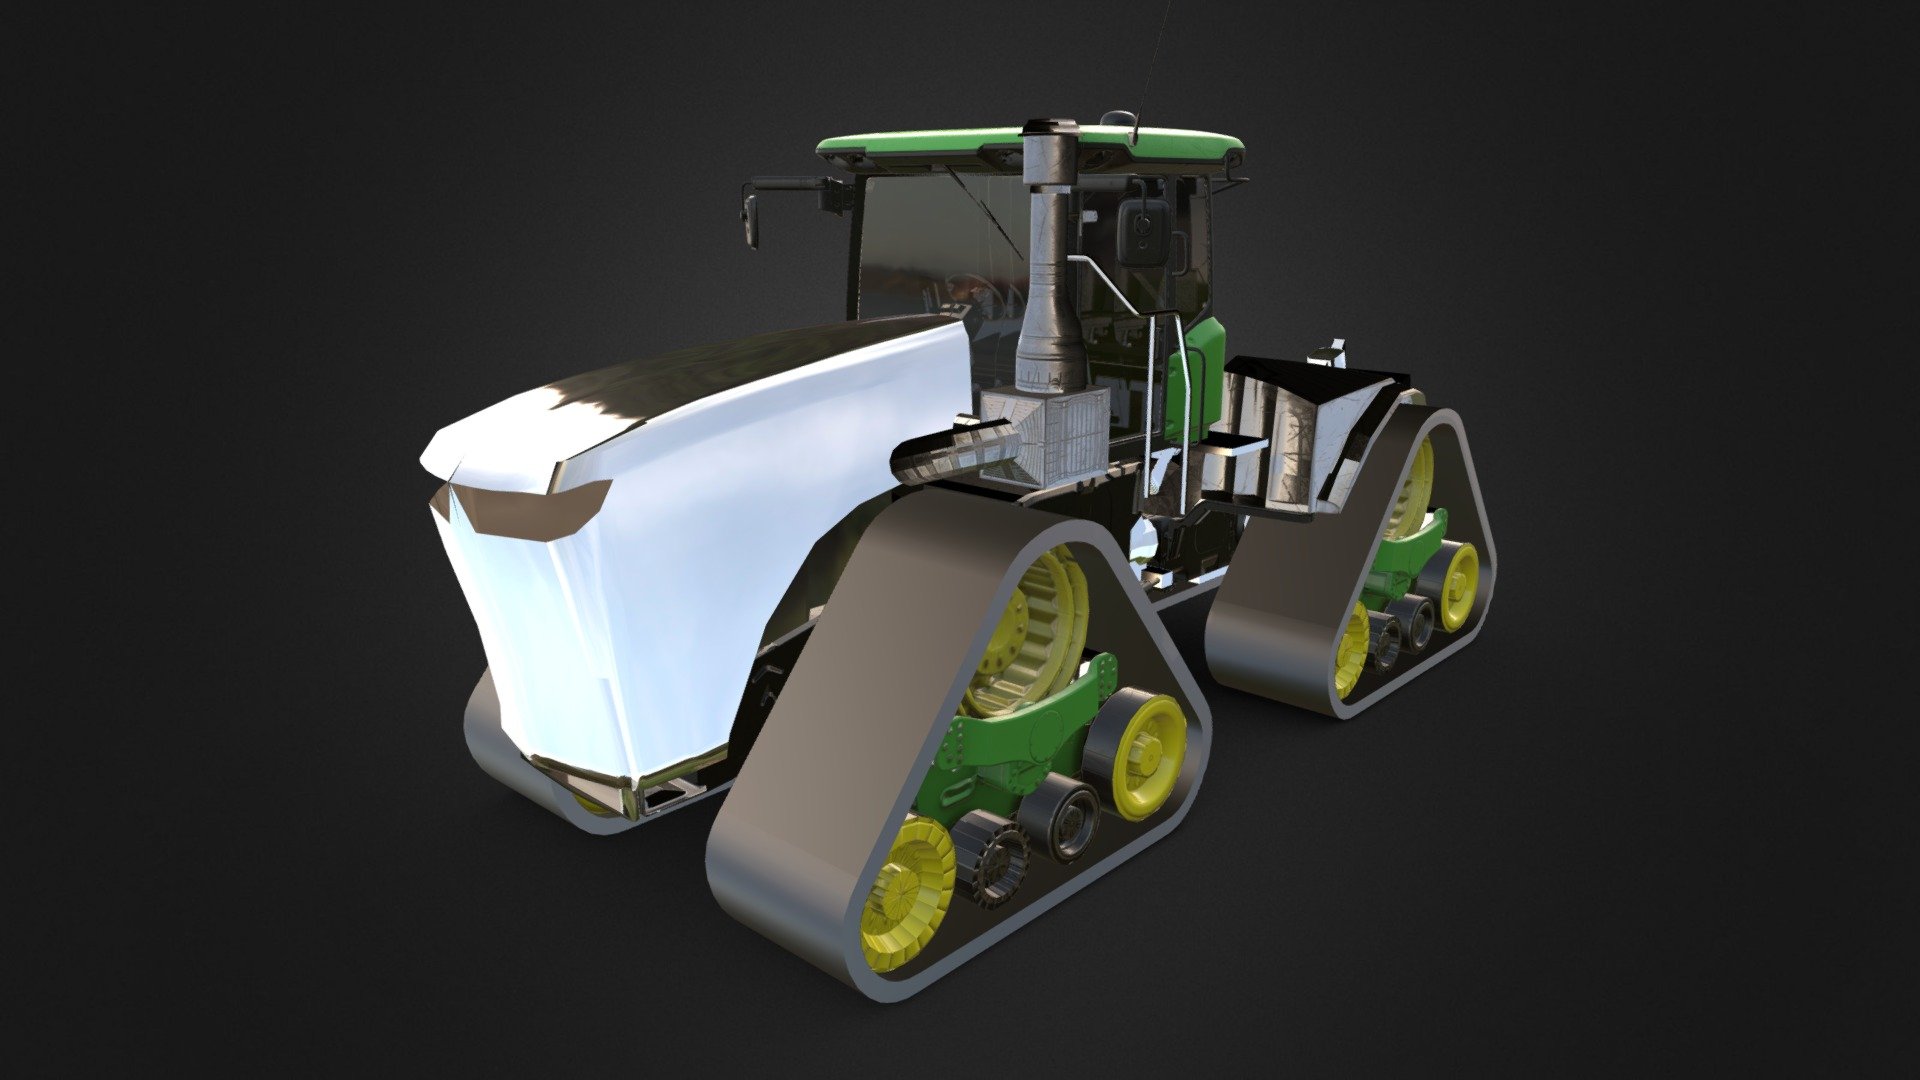 poah, das mien merk
https://www.youtube.com/watch?v=GlYl1xlDqcc
the John Deere 9RX tractor, created from a CAD file, adapted to be lower poly and use-able in unreal engine 3d model